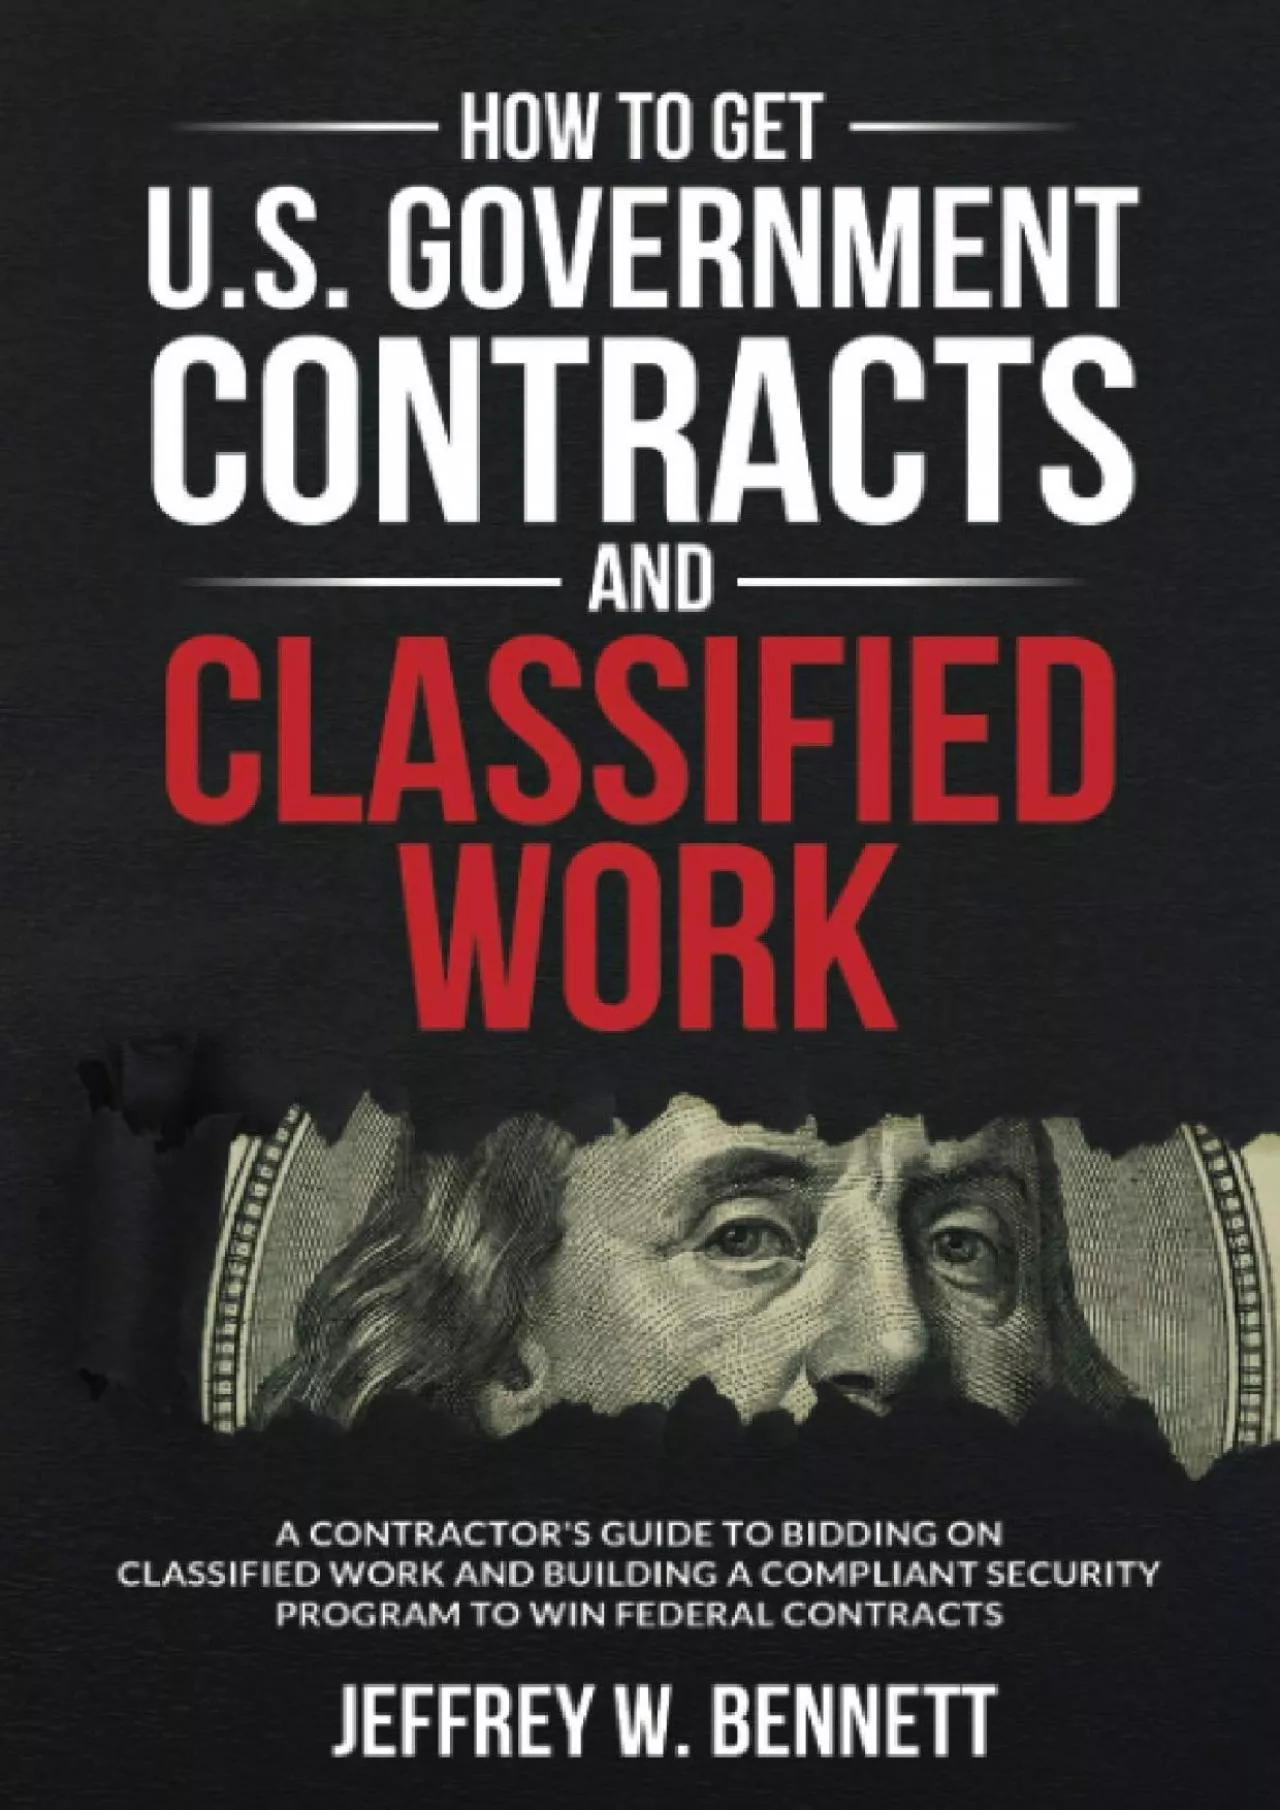 How to Get U.S. Government Contracts and Classified Work: A Contractorâ€™s Guide